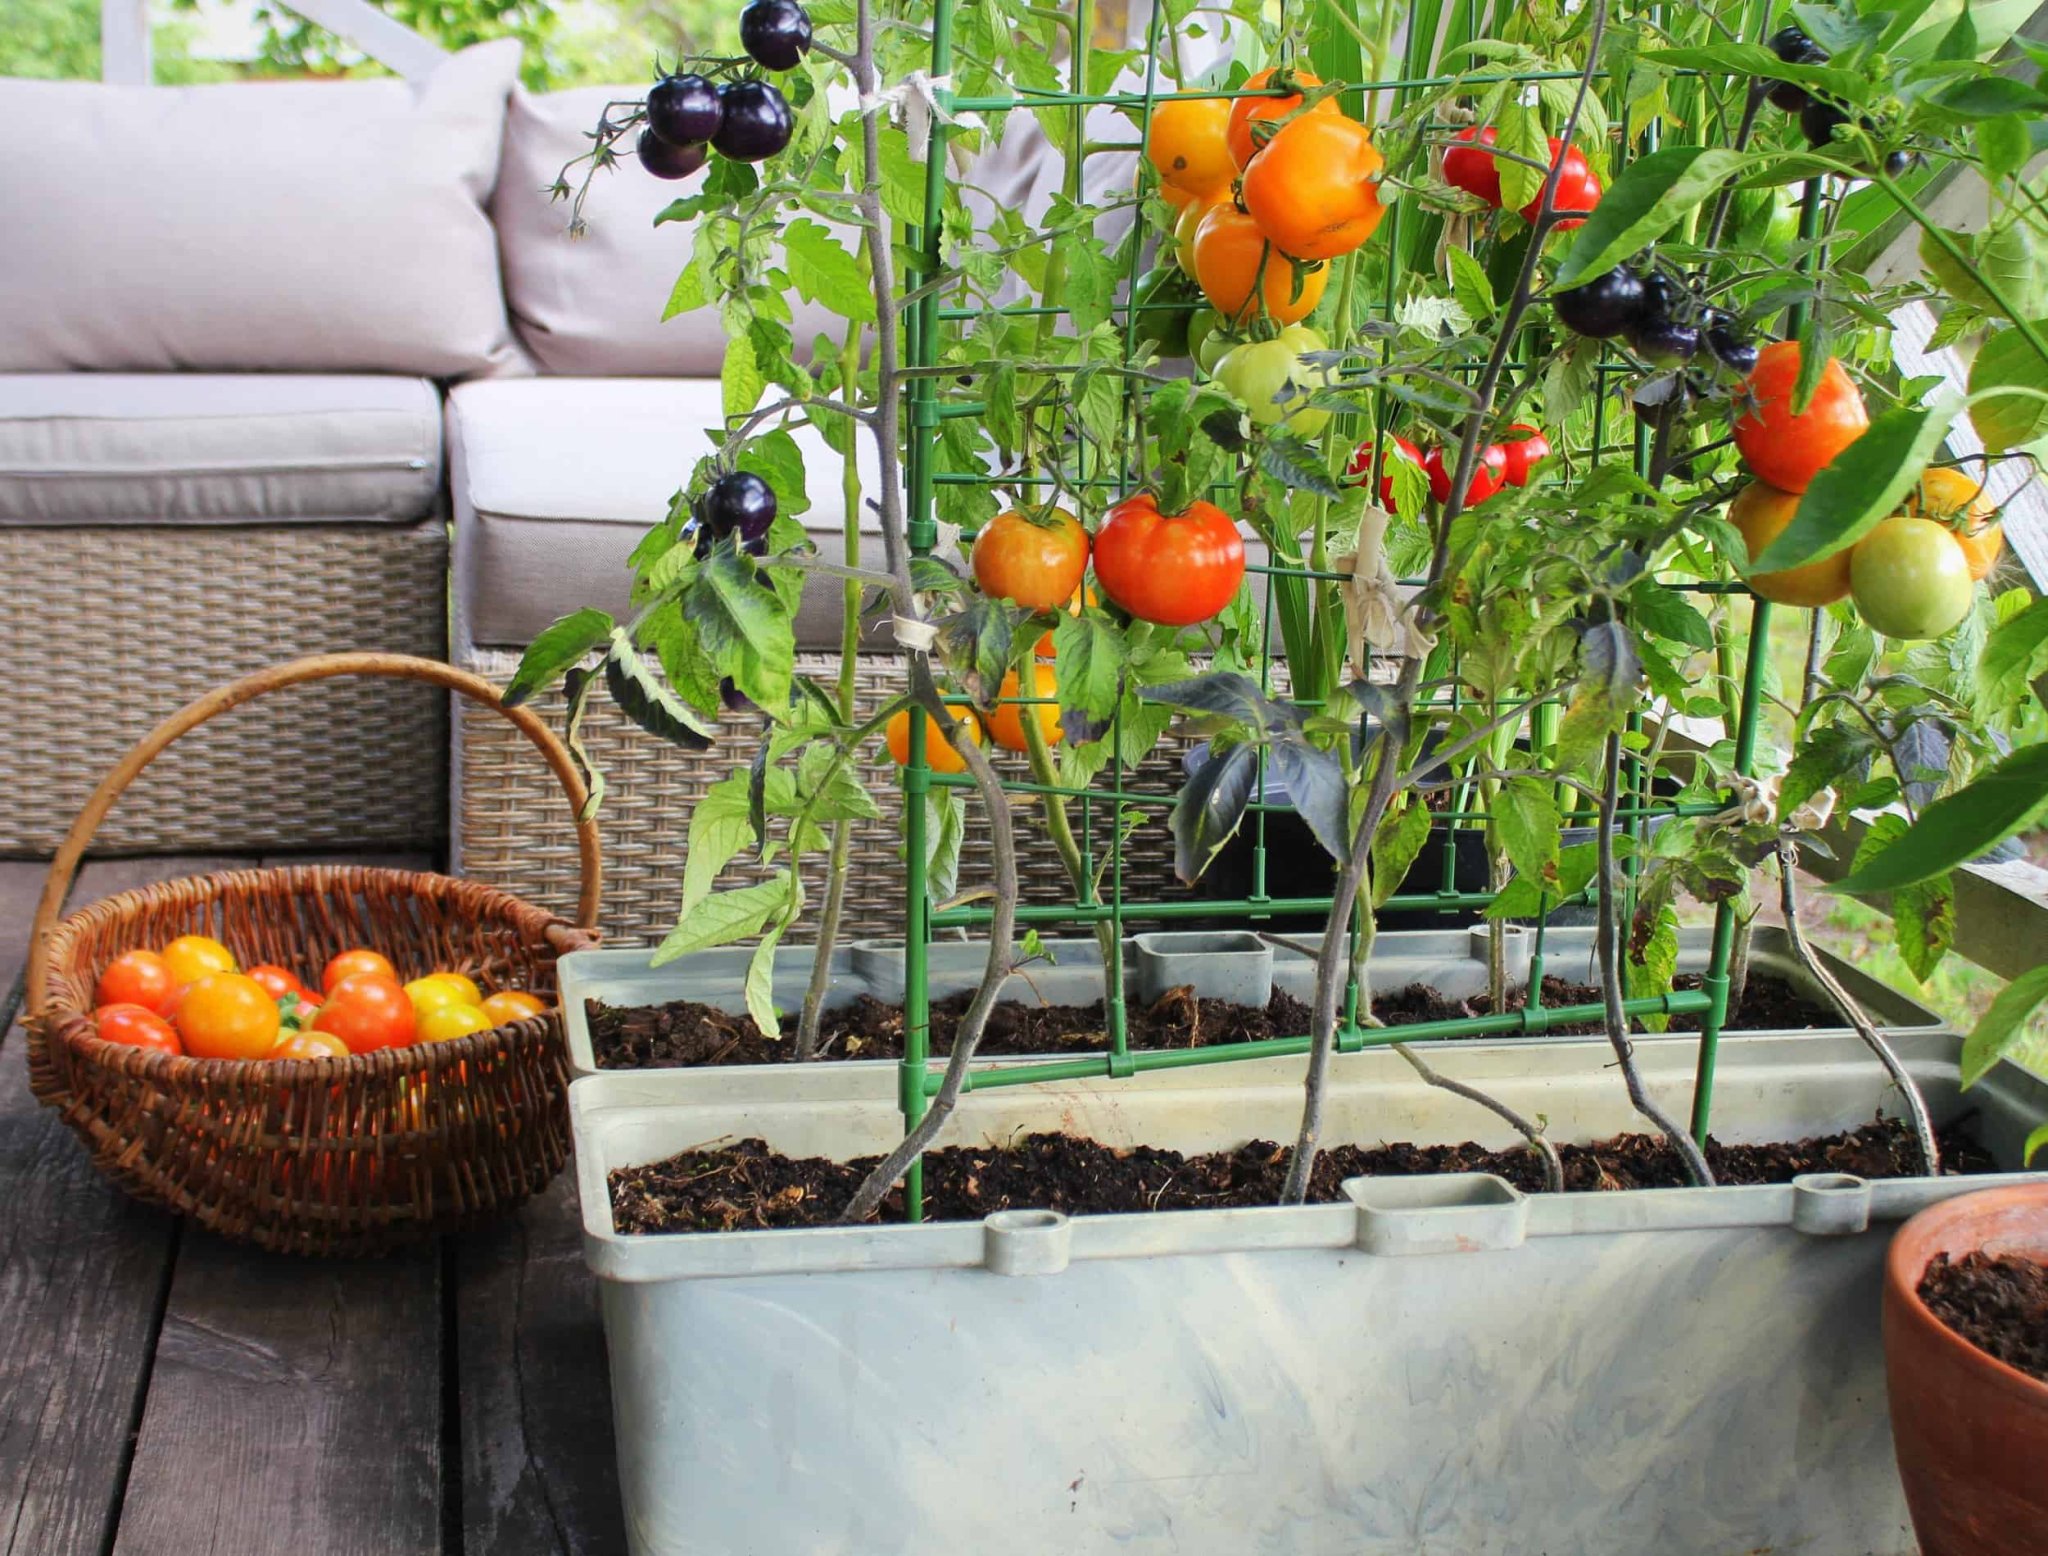 10 Vegetables Best to Grow in Small Spaces